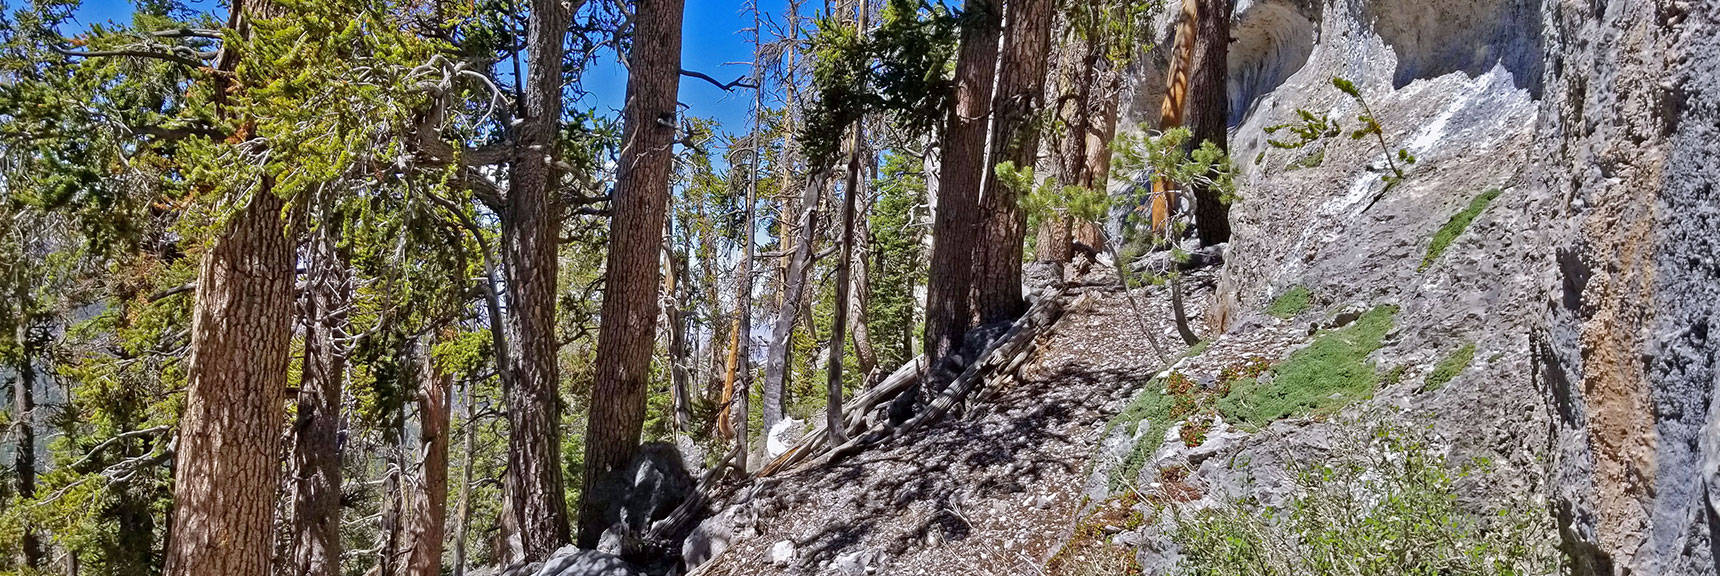 Skirting the Base of the Long Ridge Cliff | Lee to Kyle Canyon | Gradual Mid Ridge Approach | Mt. Charleston Wilderness | Spring Mountains, Nevada